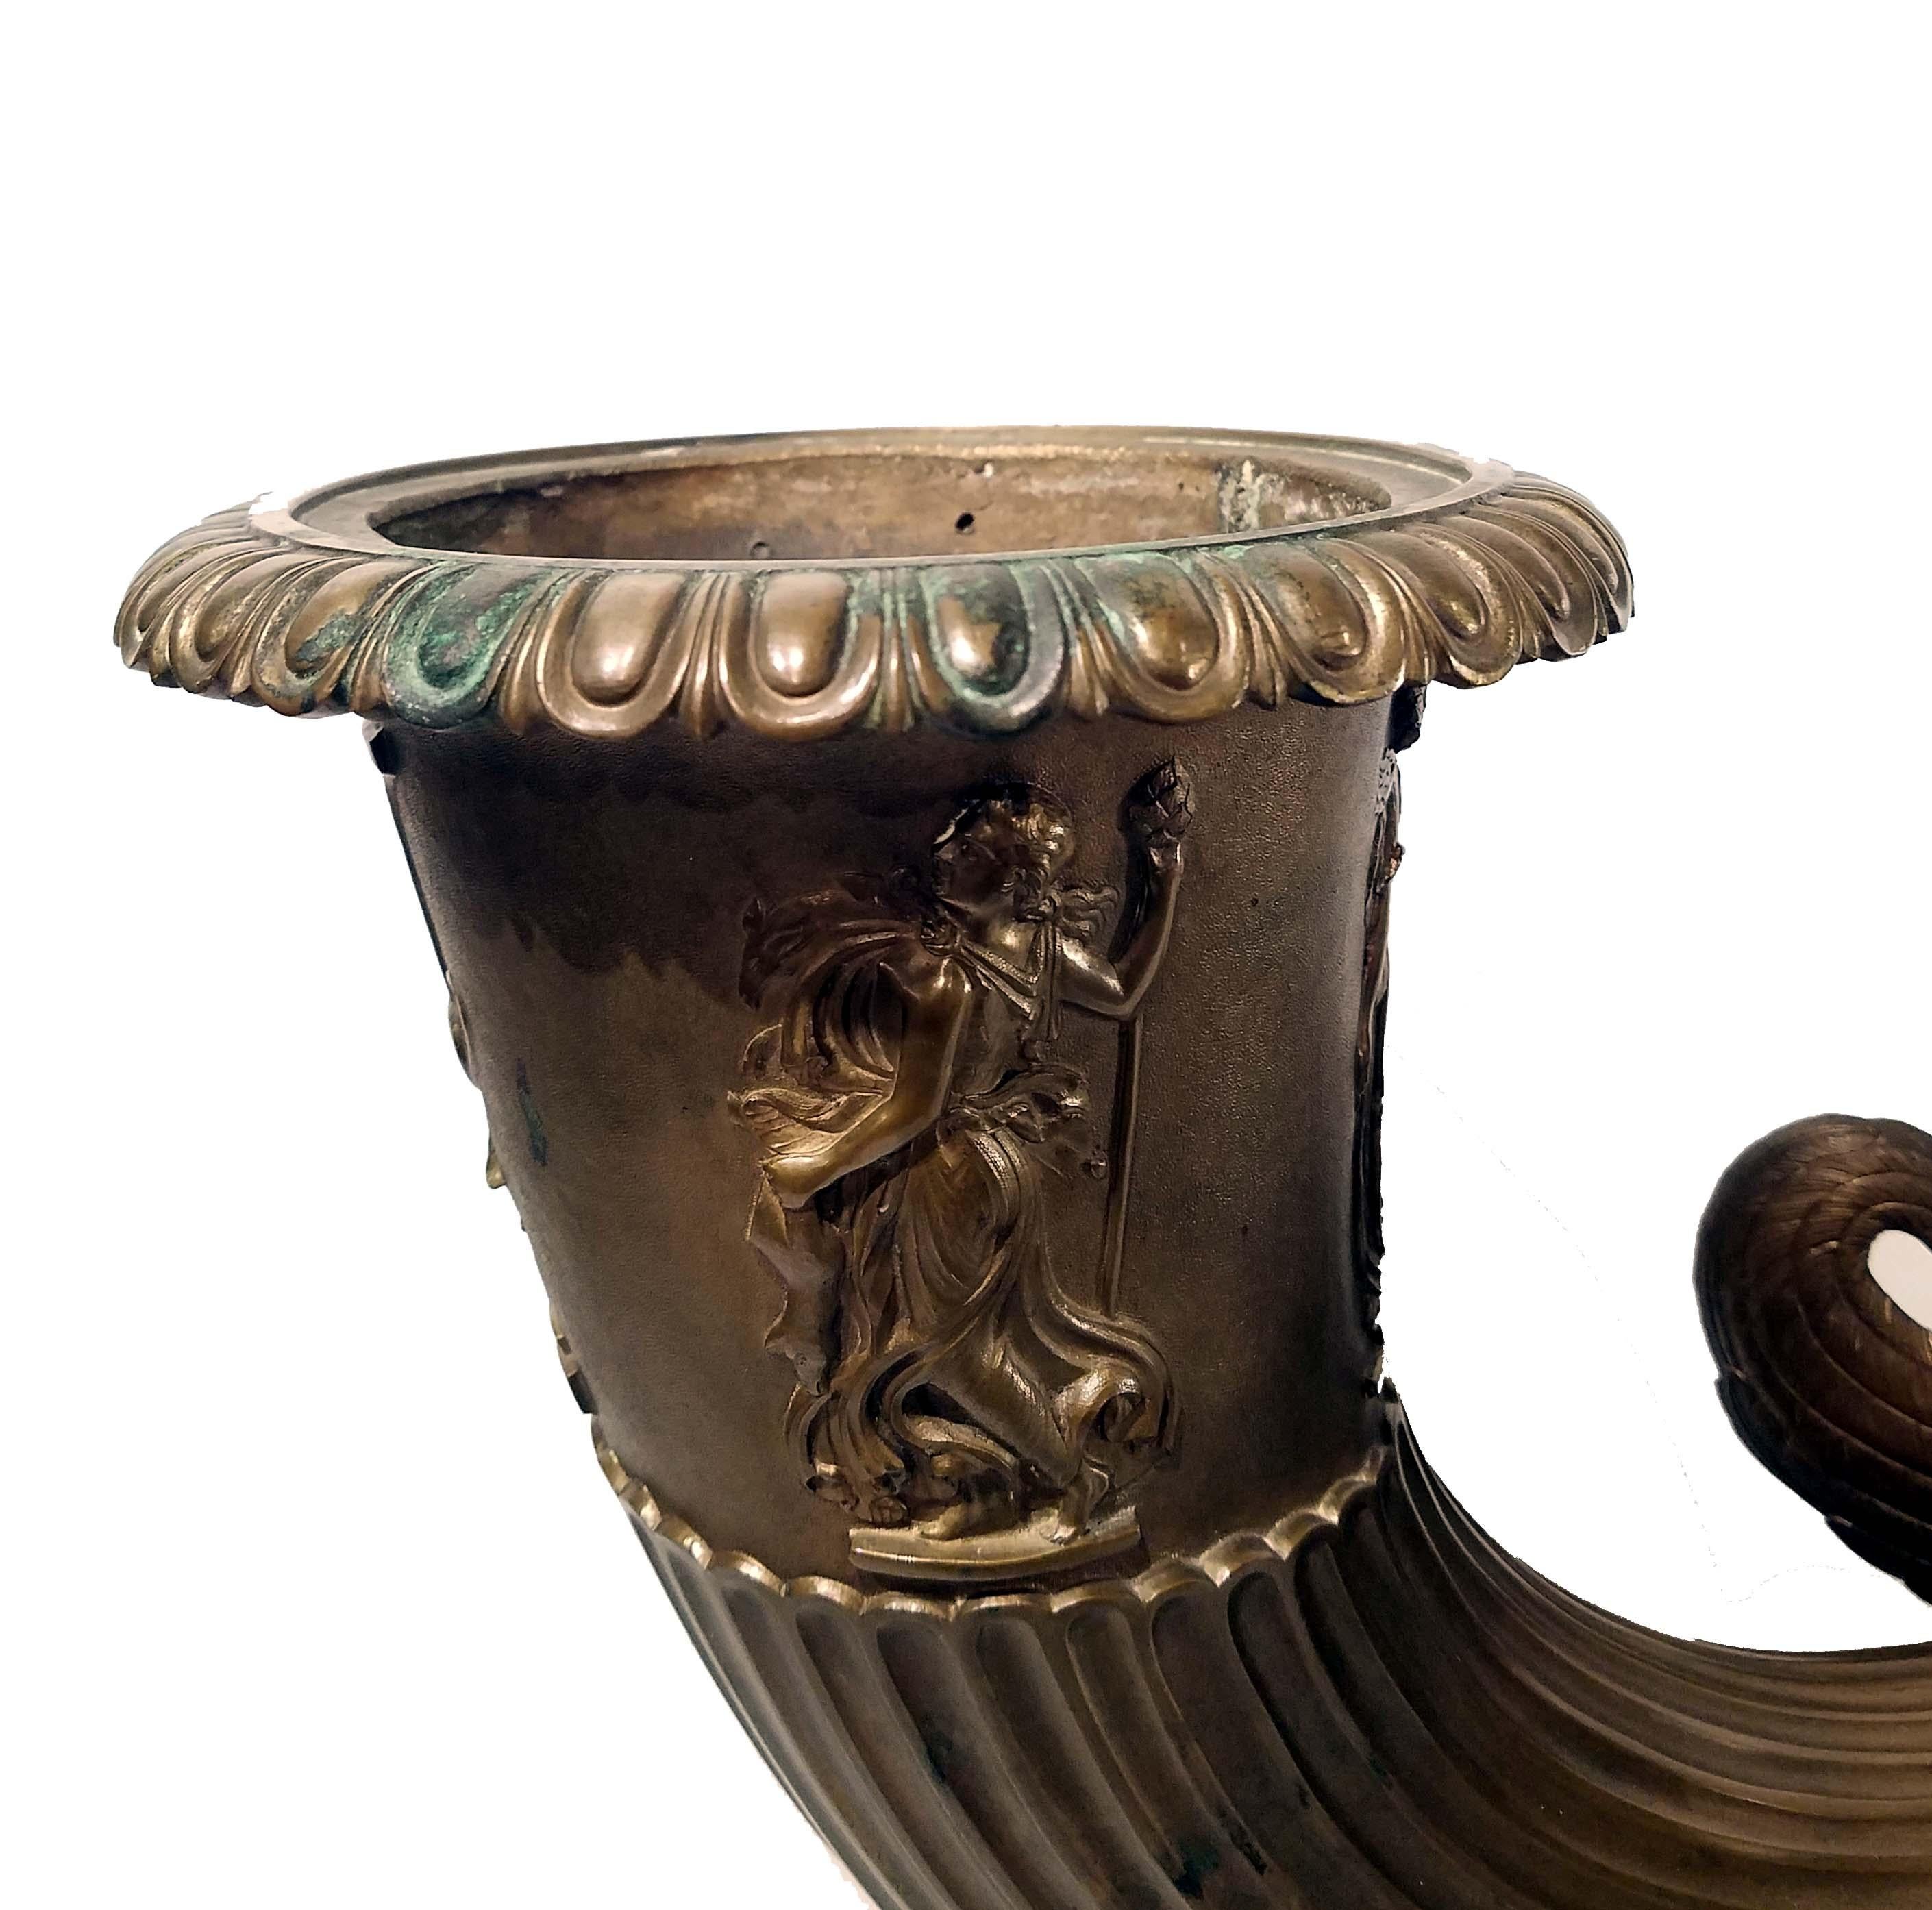 An Italian bronze Rhyton vase by Benedetto Boschetti, Rome, circa 1840. The vase cast with classical figures and an urn on folaite plinth and Belgian black marble, signed 'B. BOSCHETTI ROMA.'